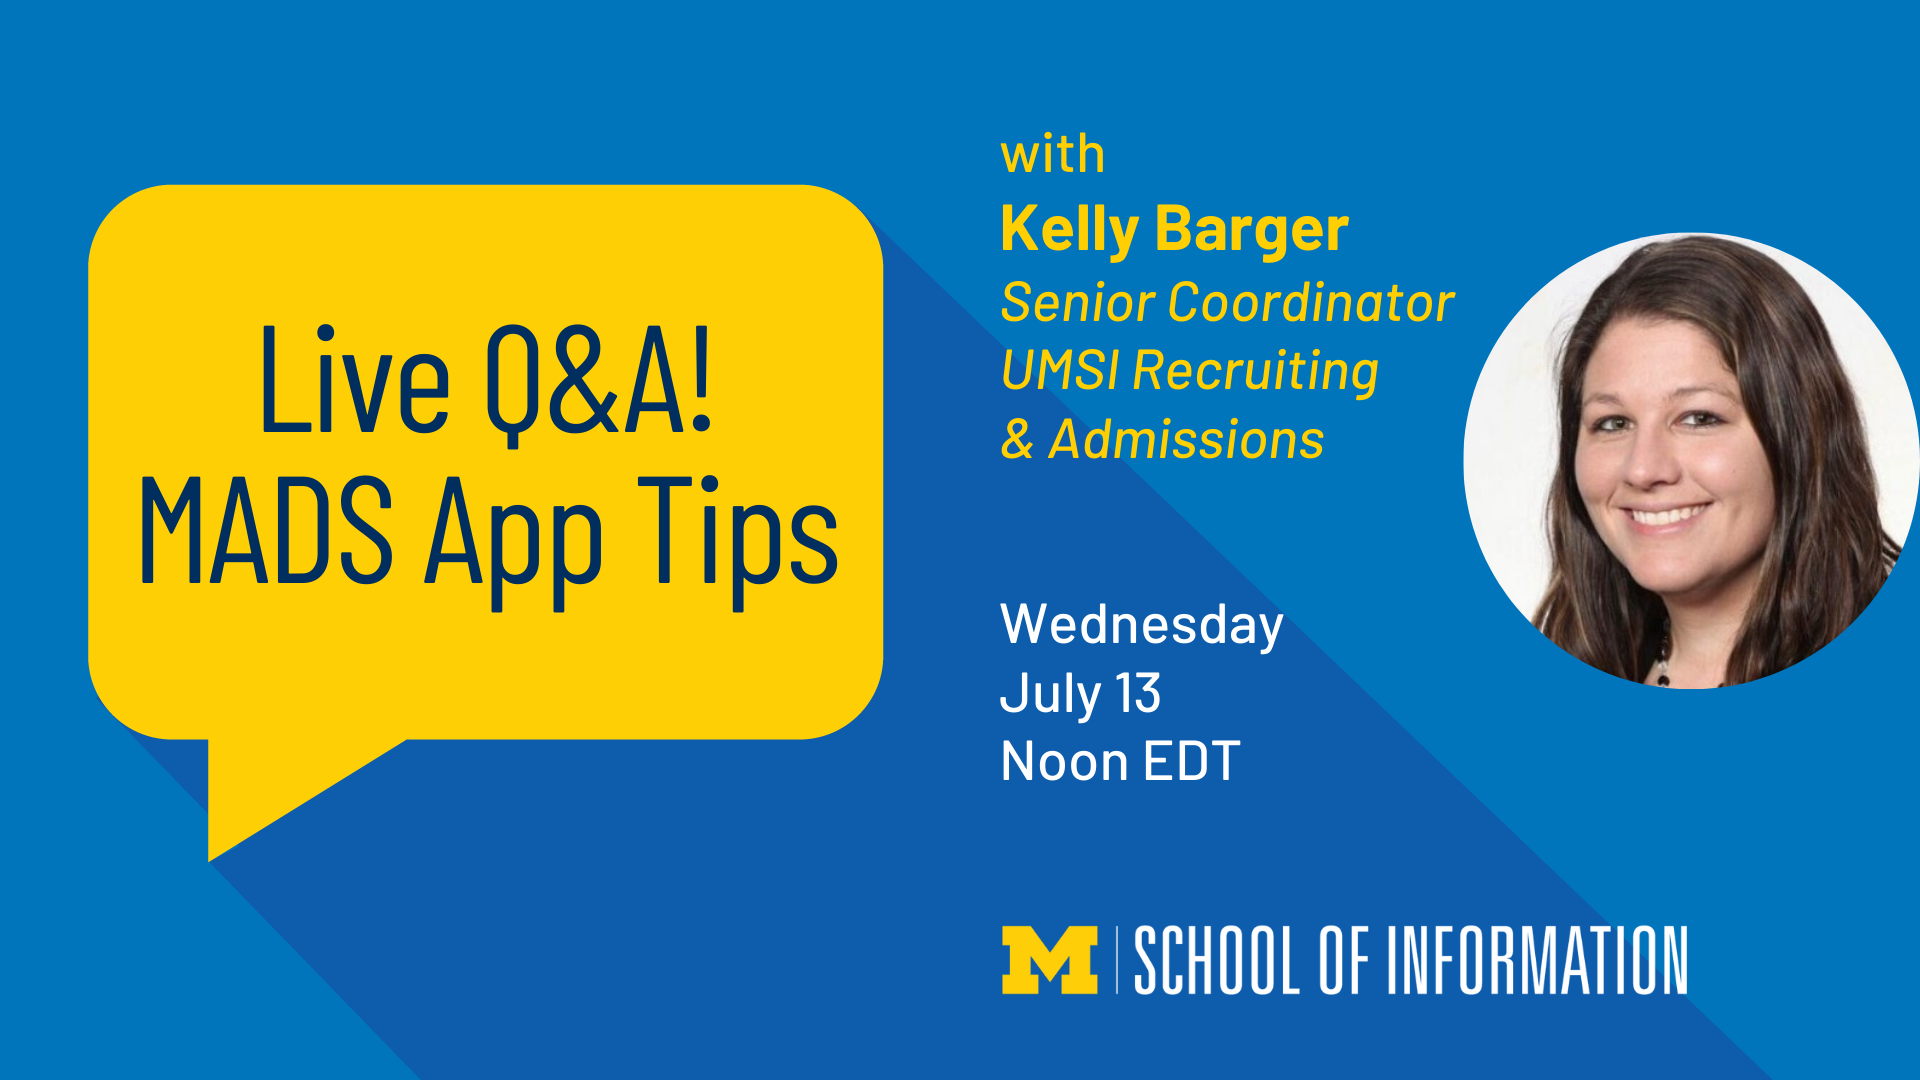 “Live Q&A! MADS App Tips with Kelly Barger. Senior Coordinator, UMSI Recruiting & Admissions. Wednesday, July 13. Noon EDT.”